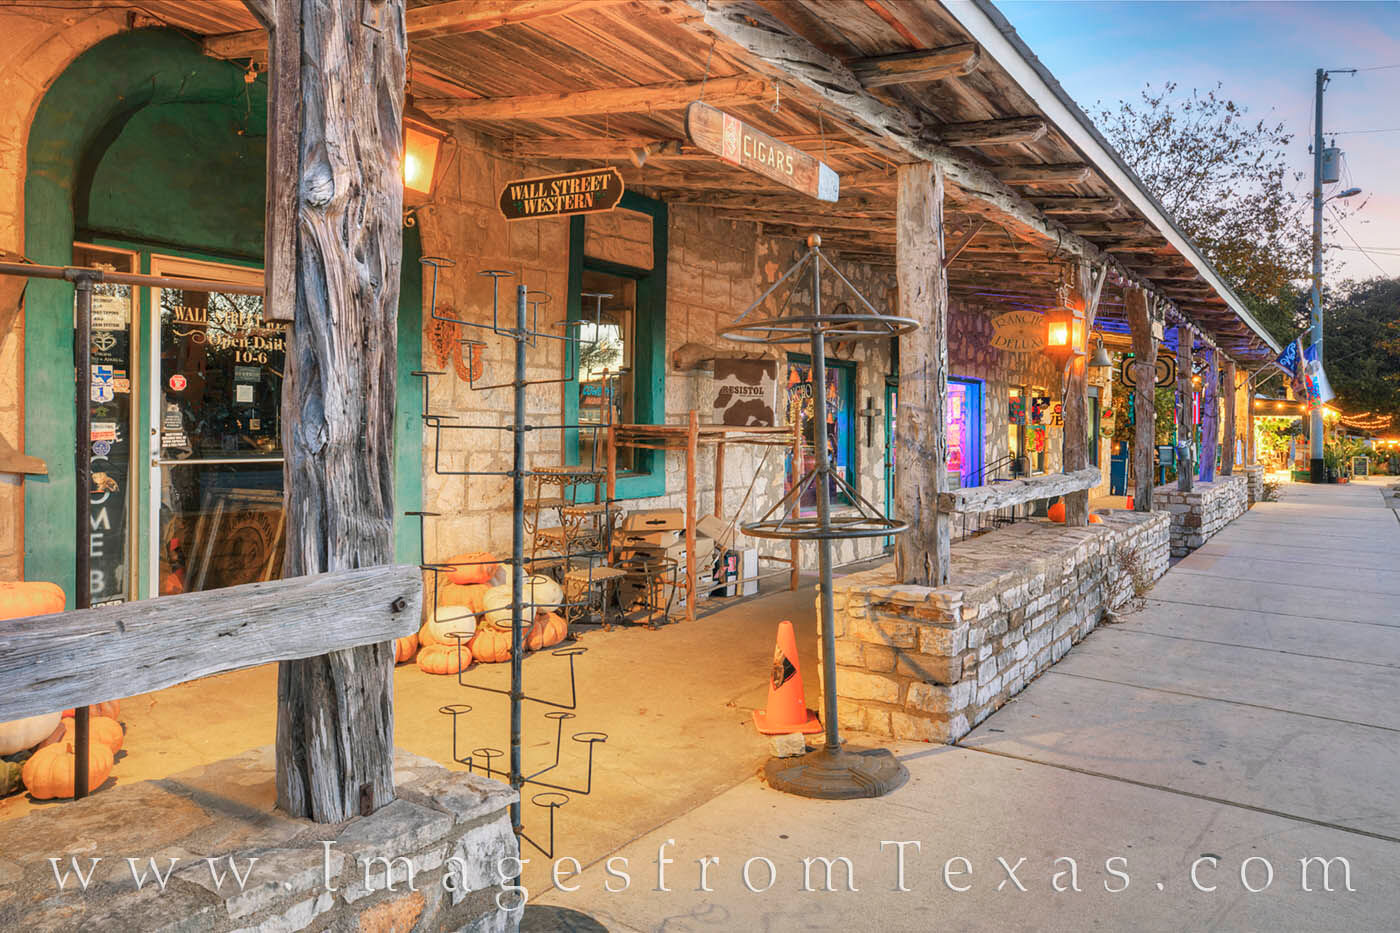 In the morning before the shops open, the main shopping area of downtown Wimberley is quiet before the bustling day begins.